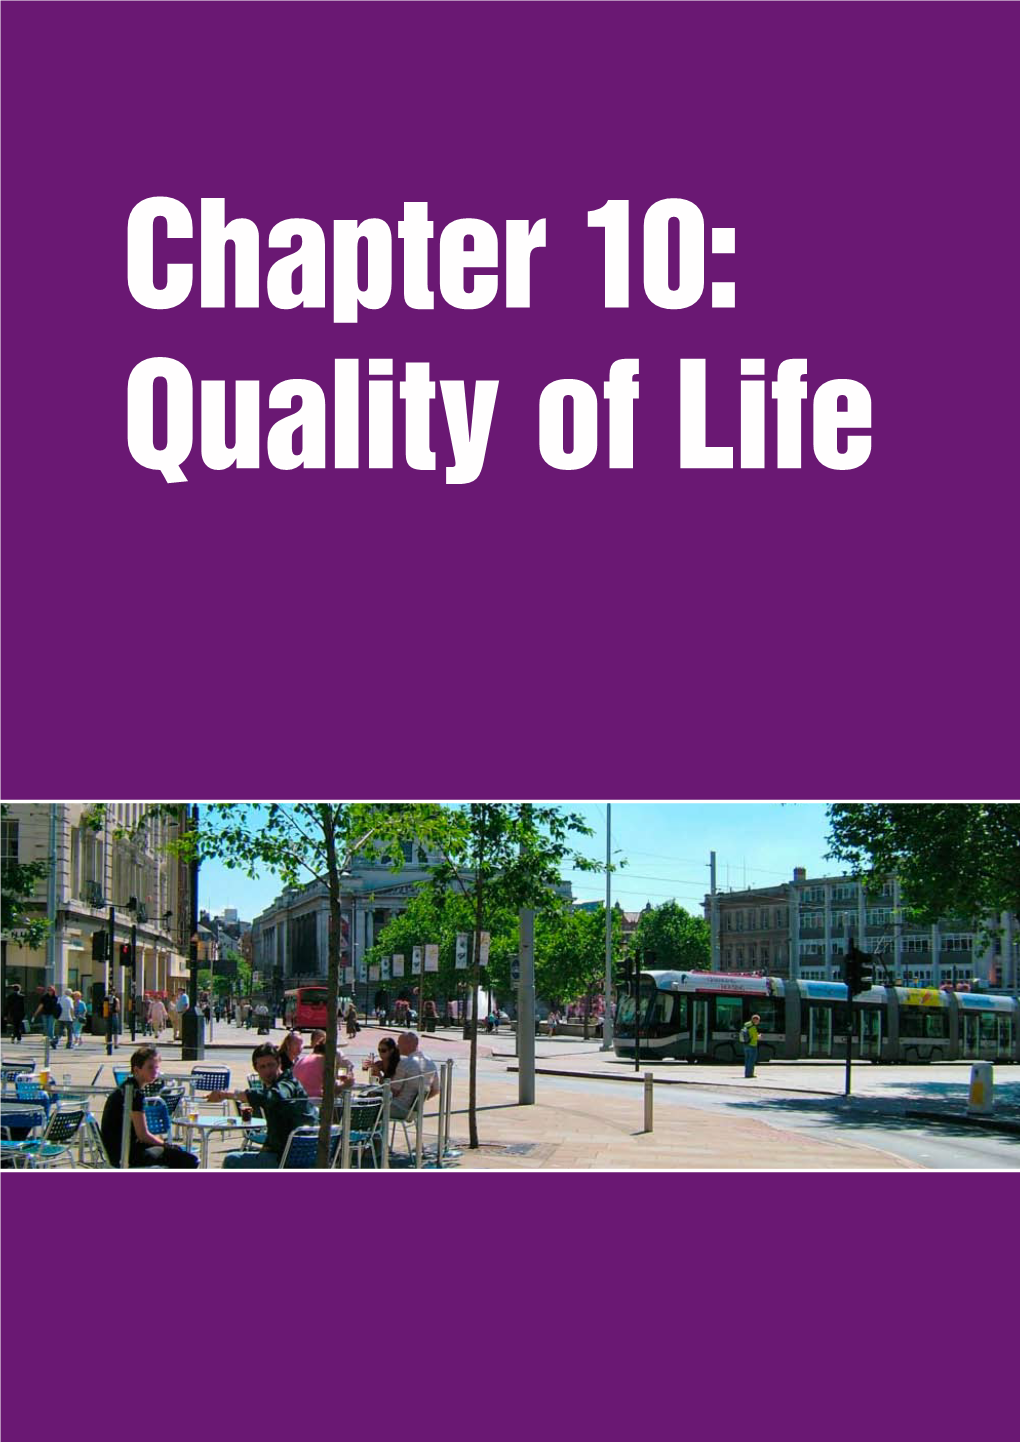 Chapter 10 Quality of Life